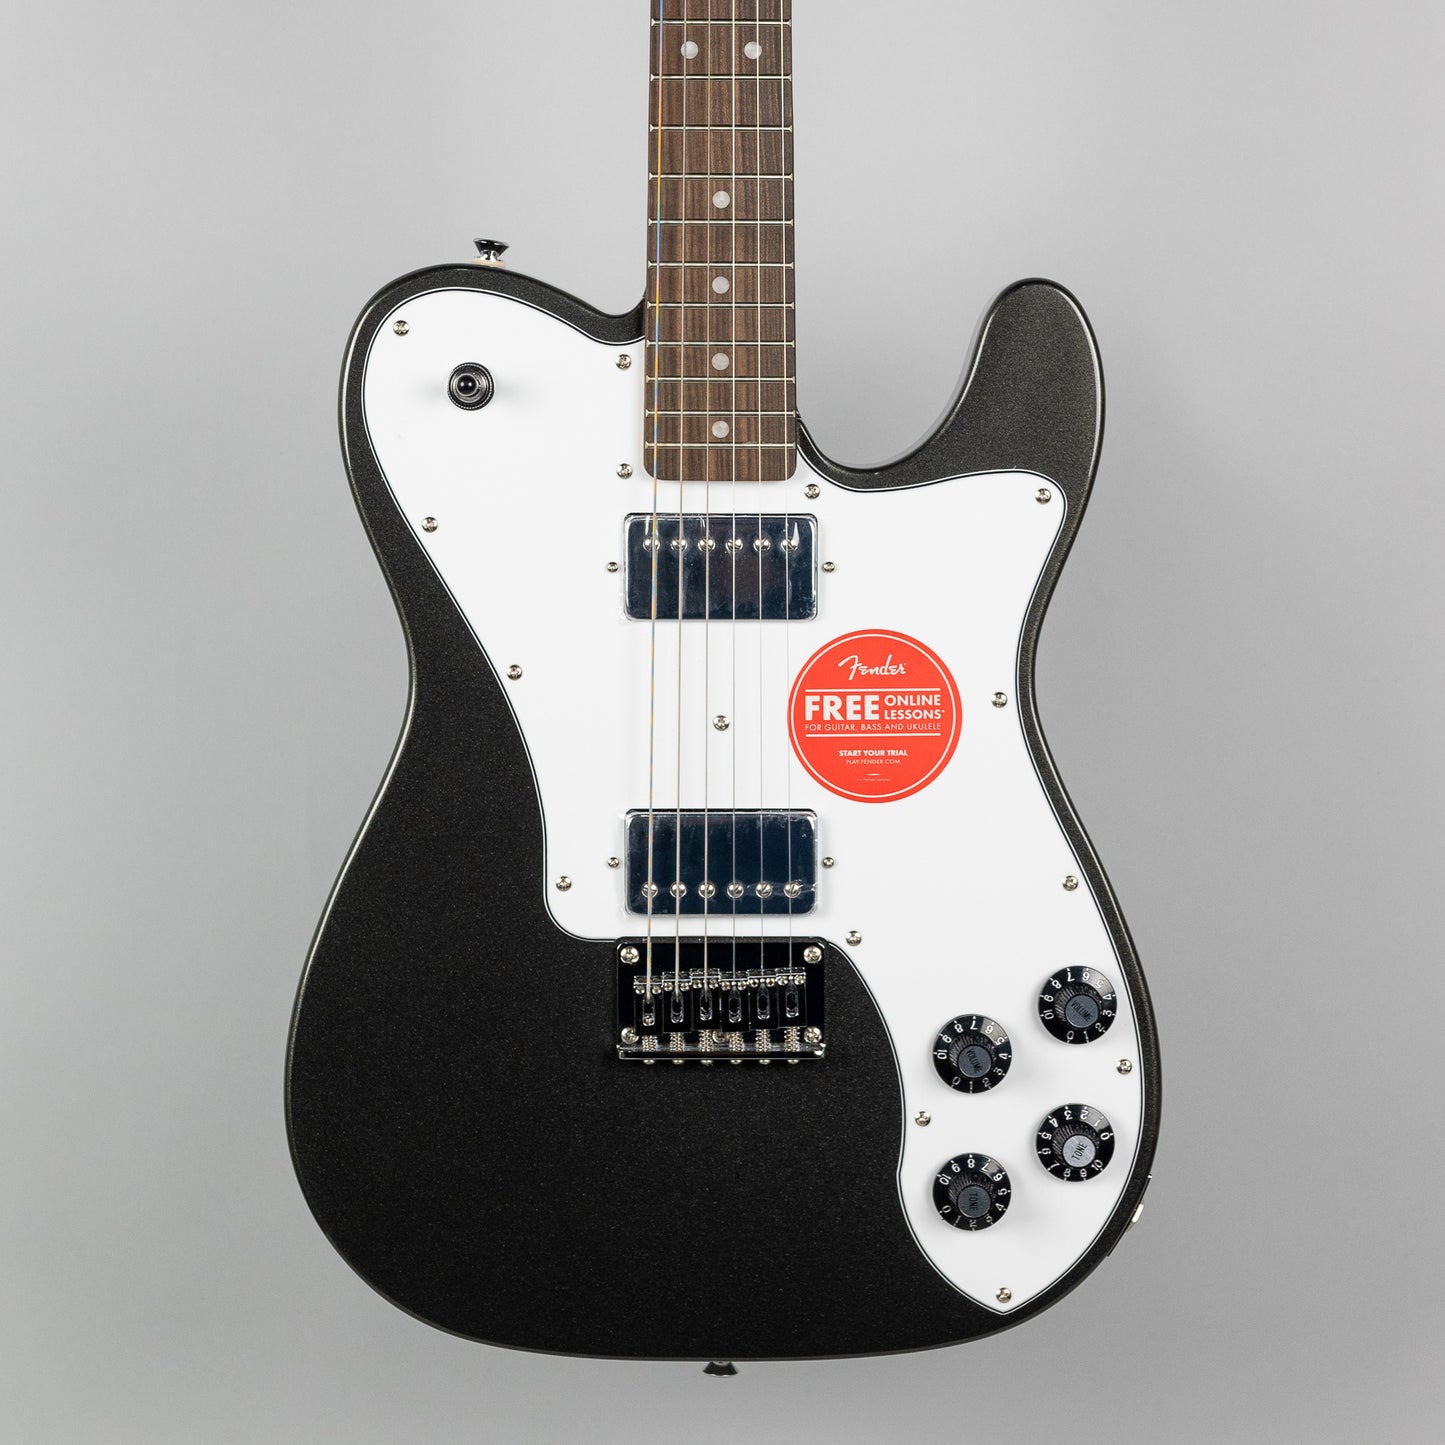 Squier Affinity Series Telecaster Deluxe in Charcoal Frost Metallic